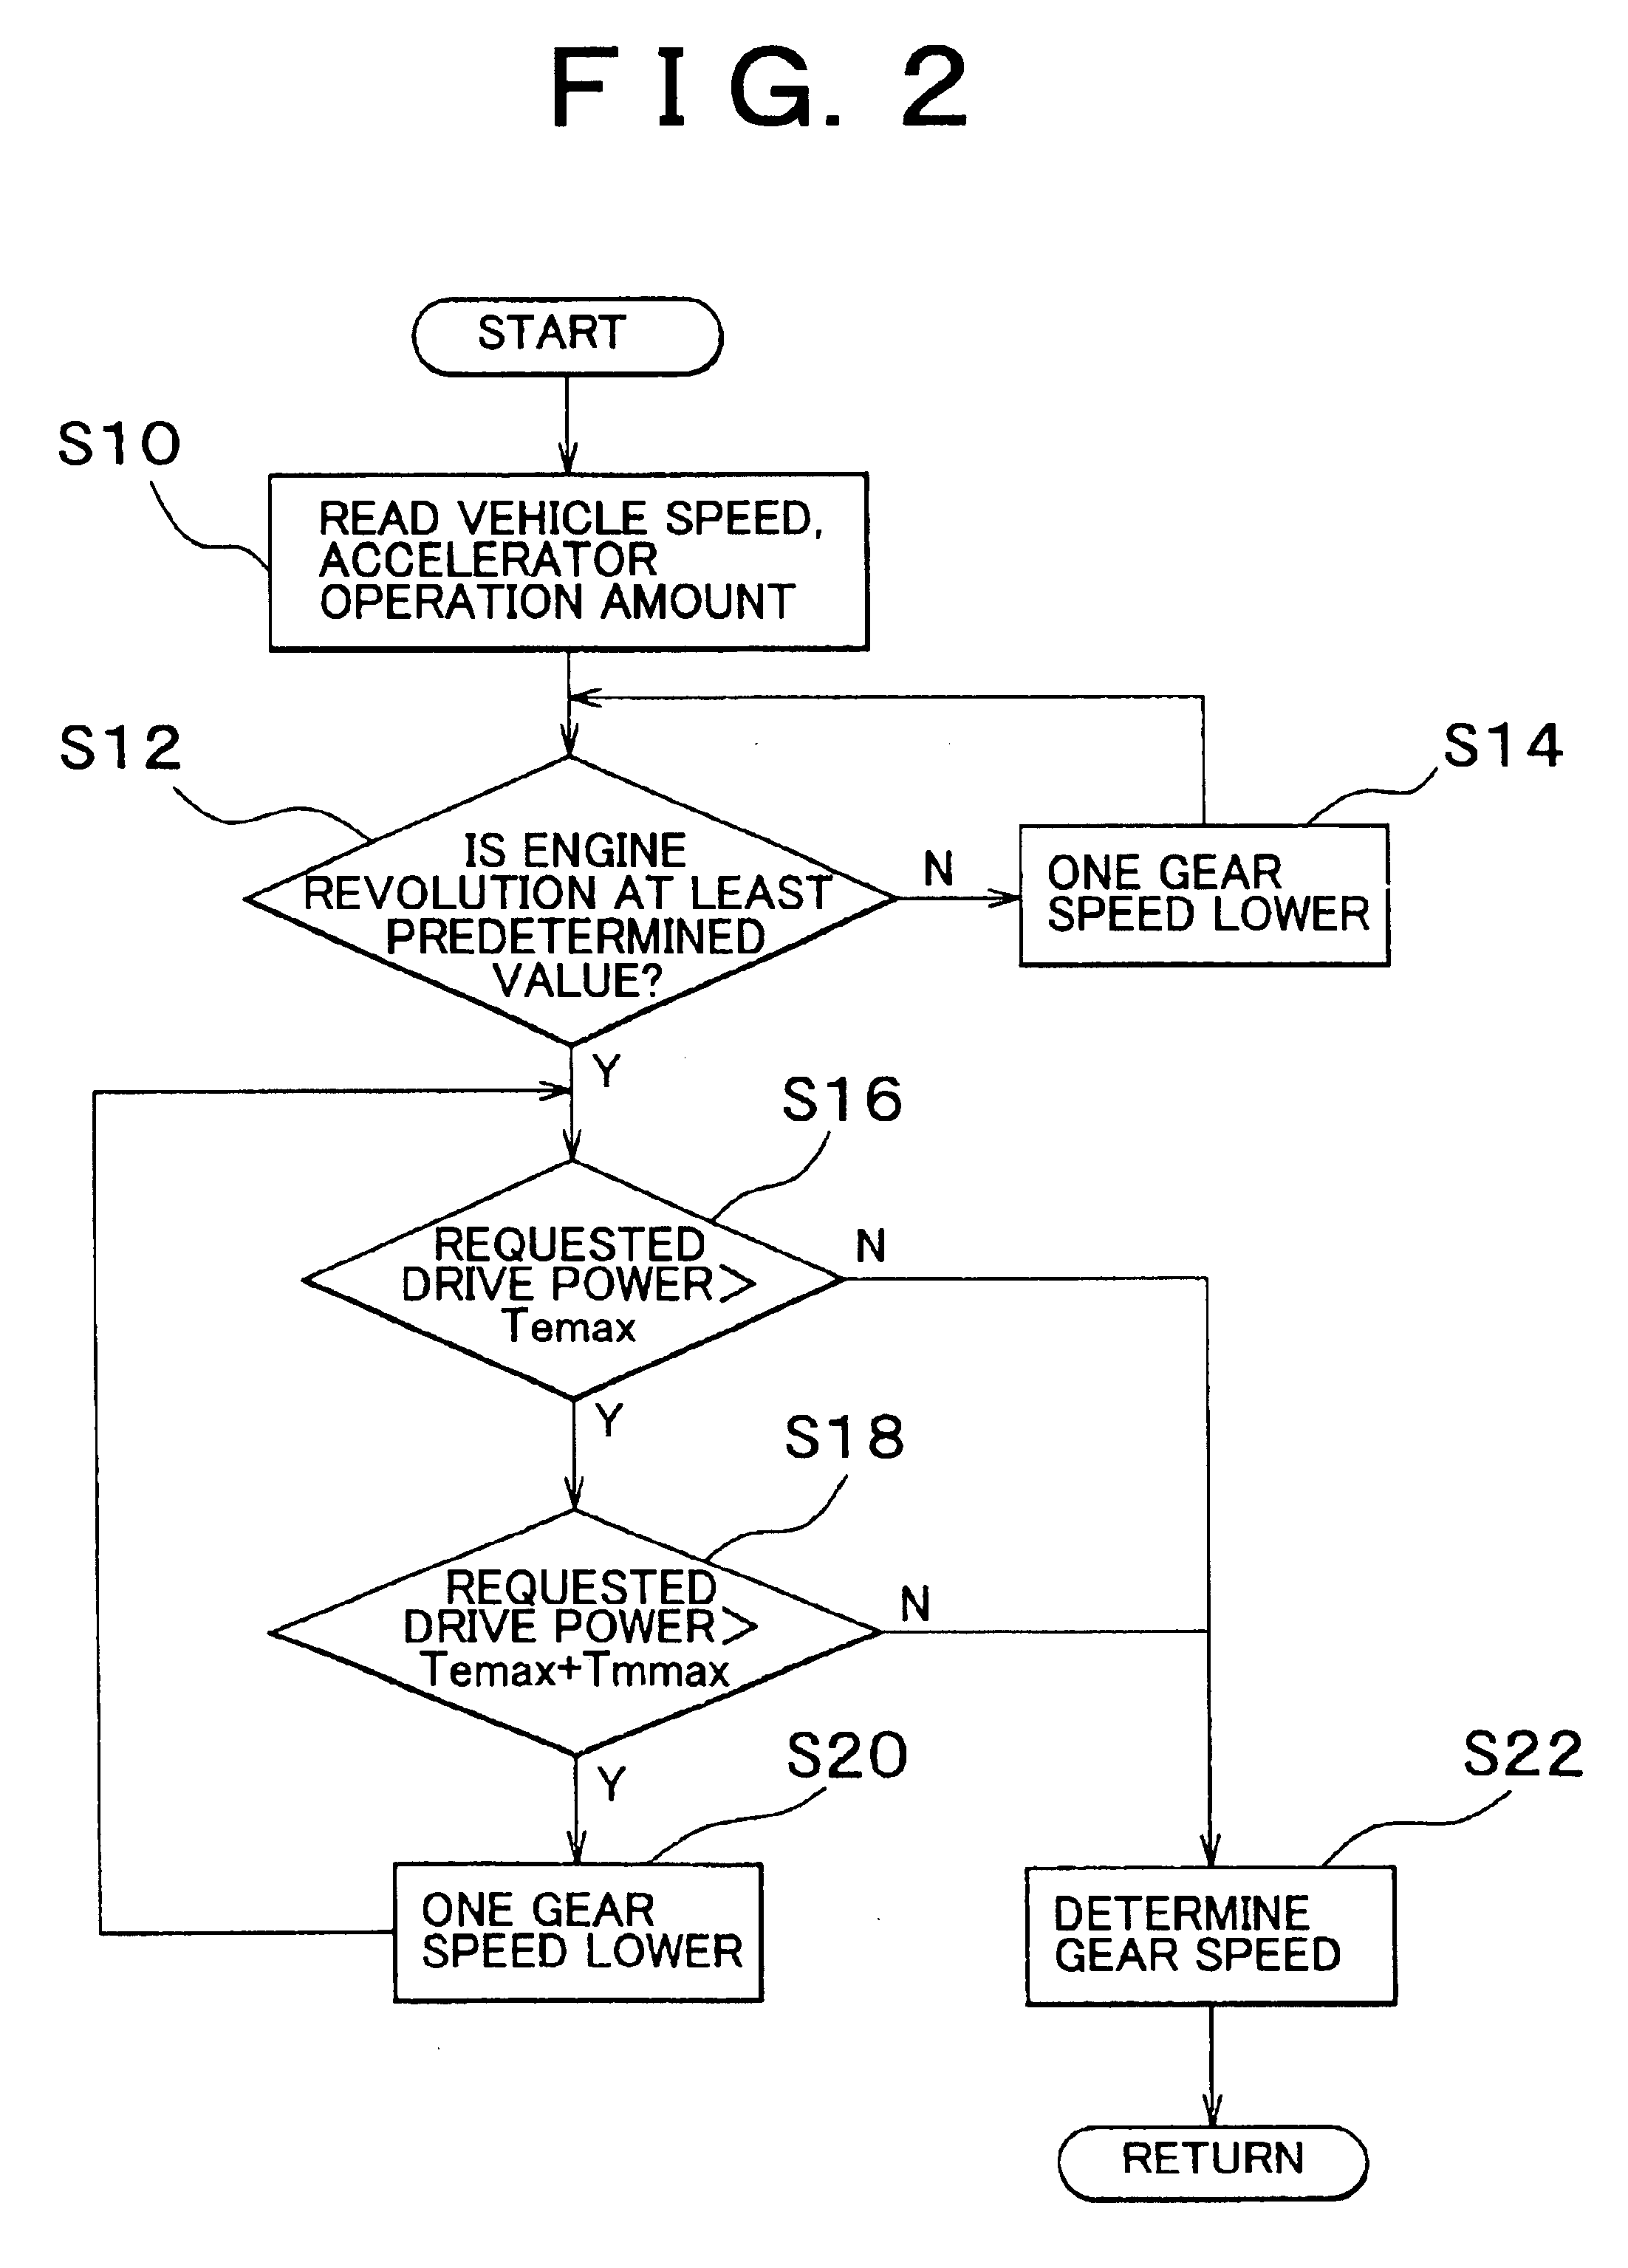 Control apparatus for transmission-equipped hybrid vehicle, and control method for the same